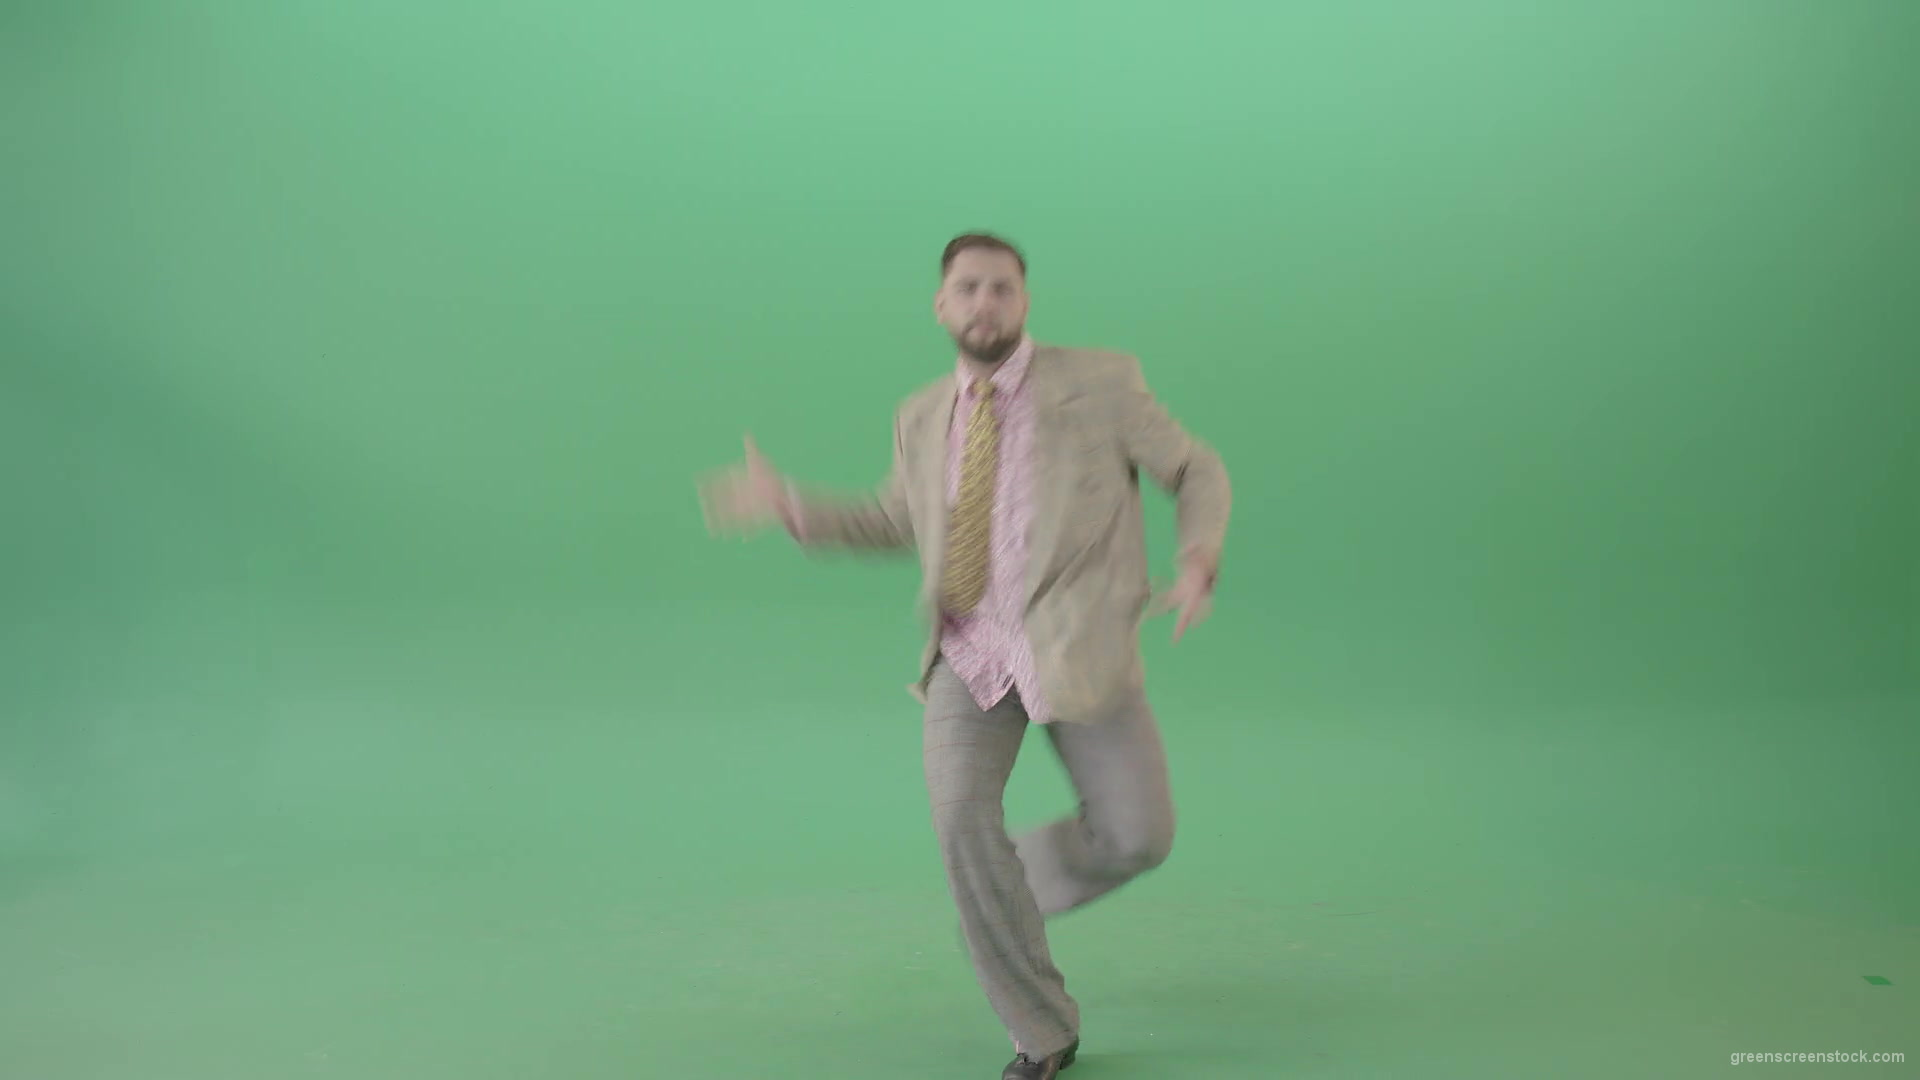 Man-dancing-shuffle-jazz-swing-Boogie-woogie-and-jumping-isolated-over-Green-Screen-4K-Video-Footage-1920_008 Green Screen Stock